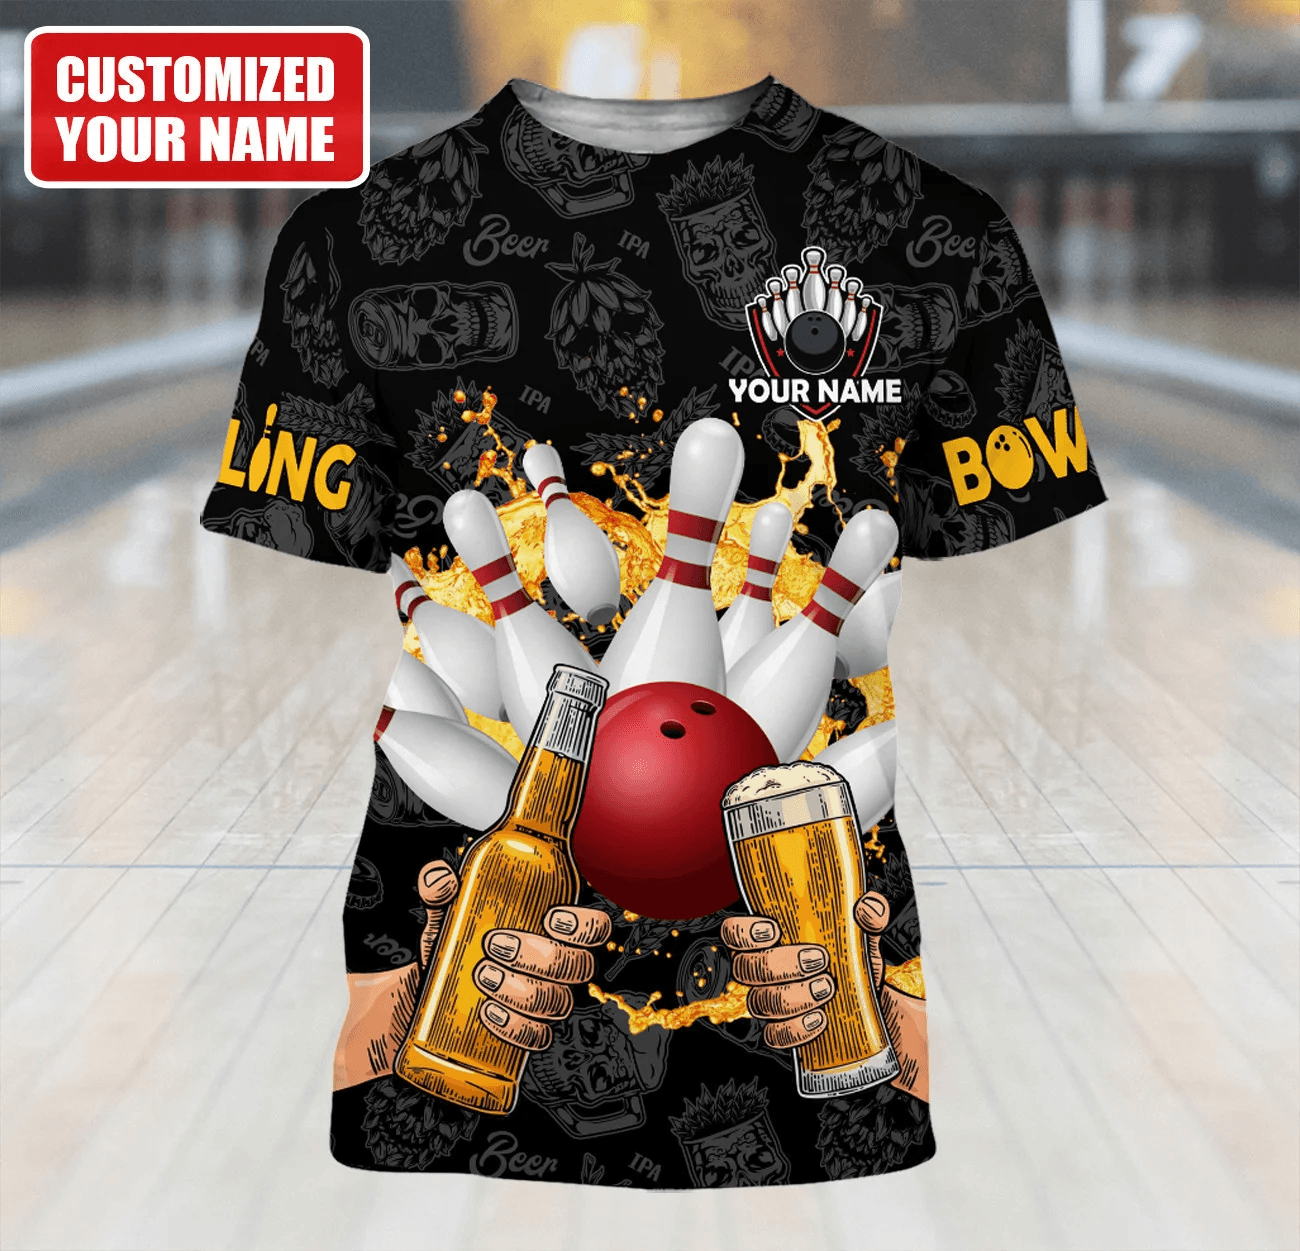 Customized Name Bowling And Beer T Shirt, Personalized Bowling Beer Shirts - Perfect Gift For Men, Bowling Lovers - Amzanimalsgift